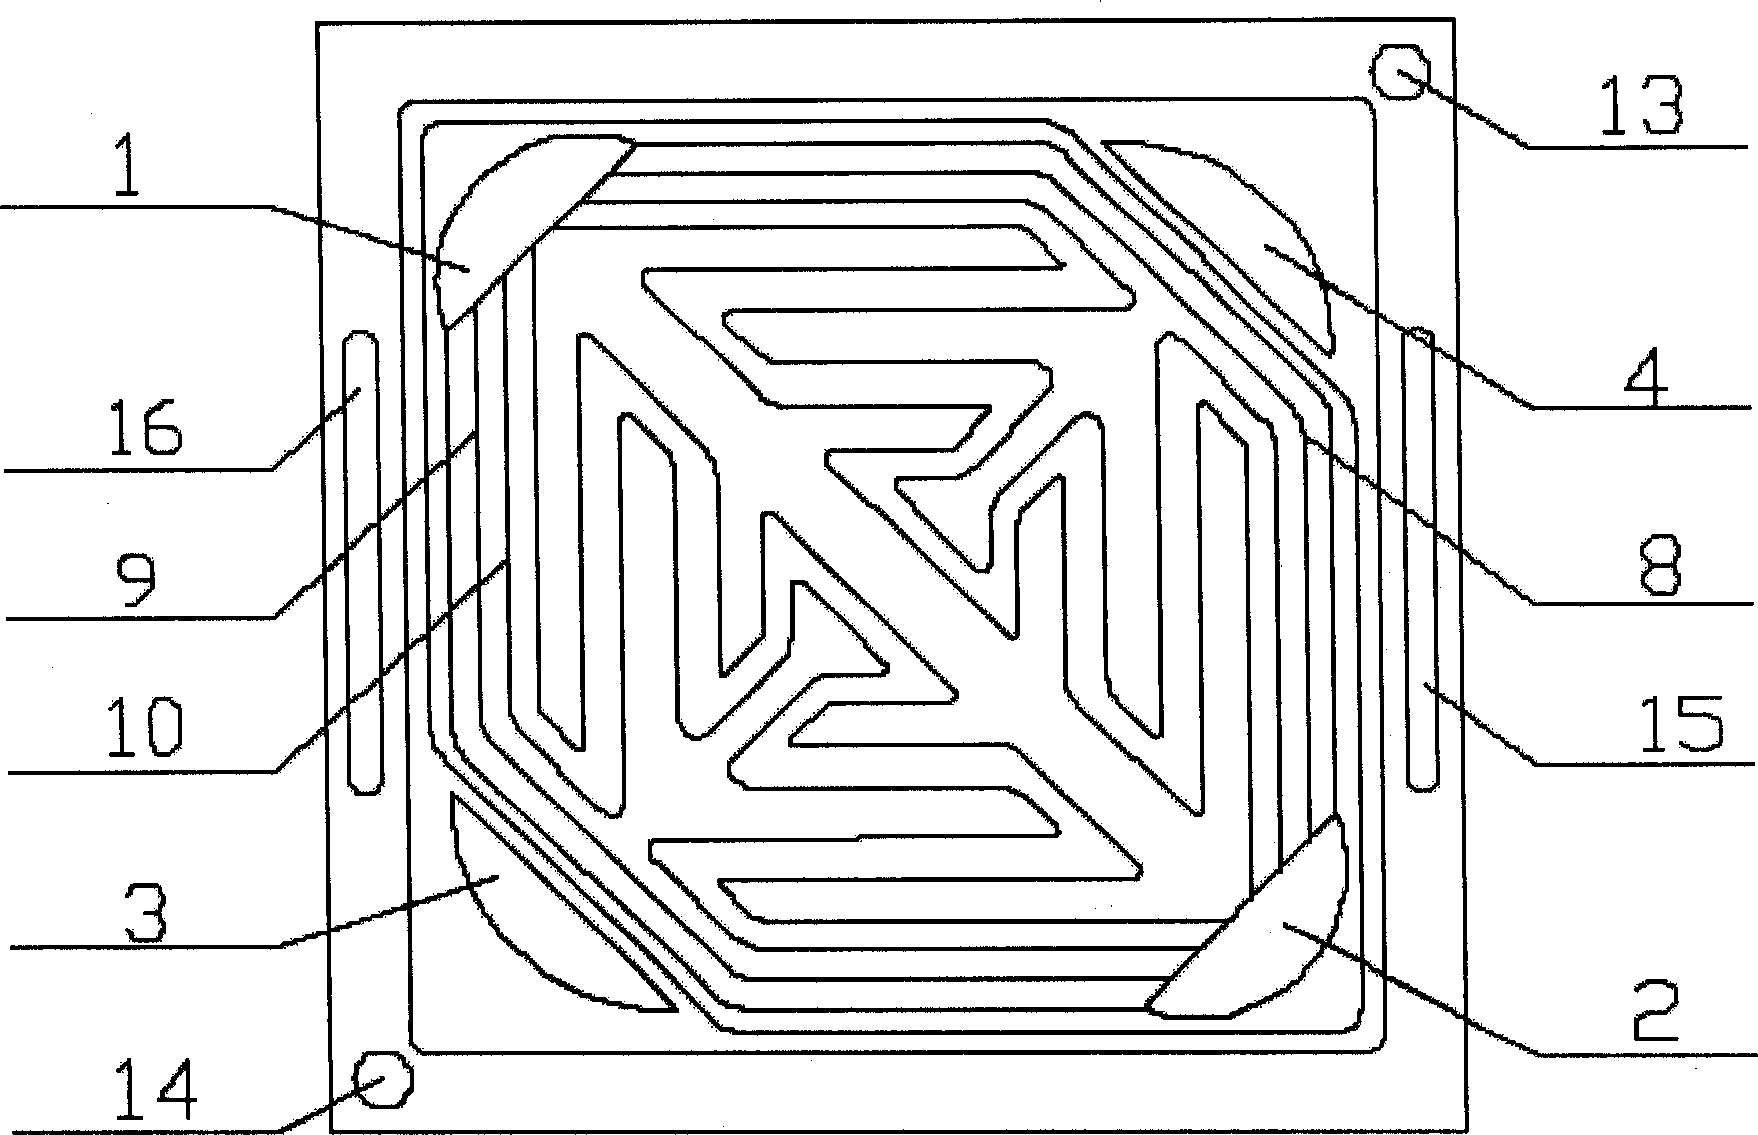 Structure of double-swallow-tail shape flow field plate for proton exchange membrane fuel cell